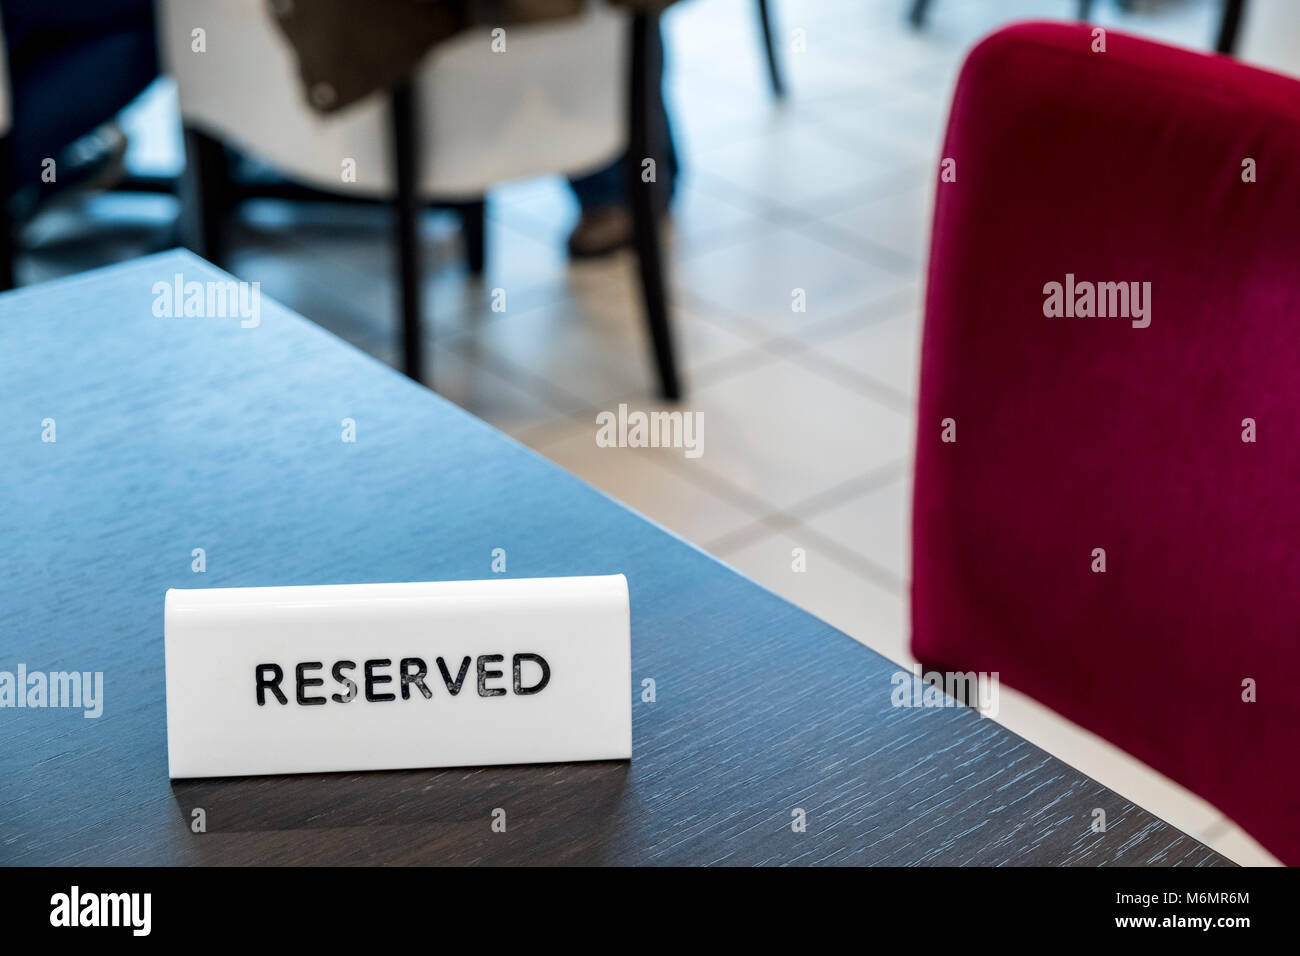 Table reservation. Reserved sign on a table, England, UK Stock Photo